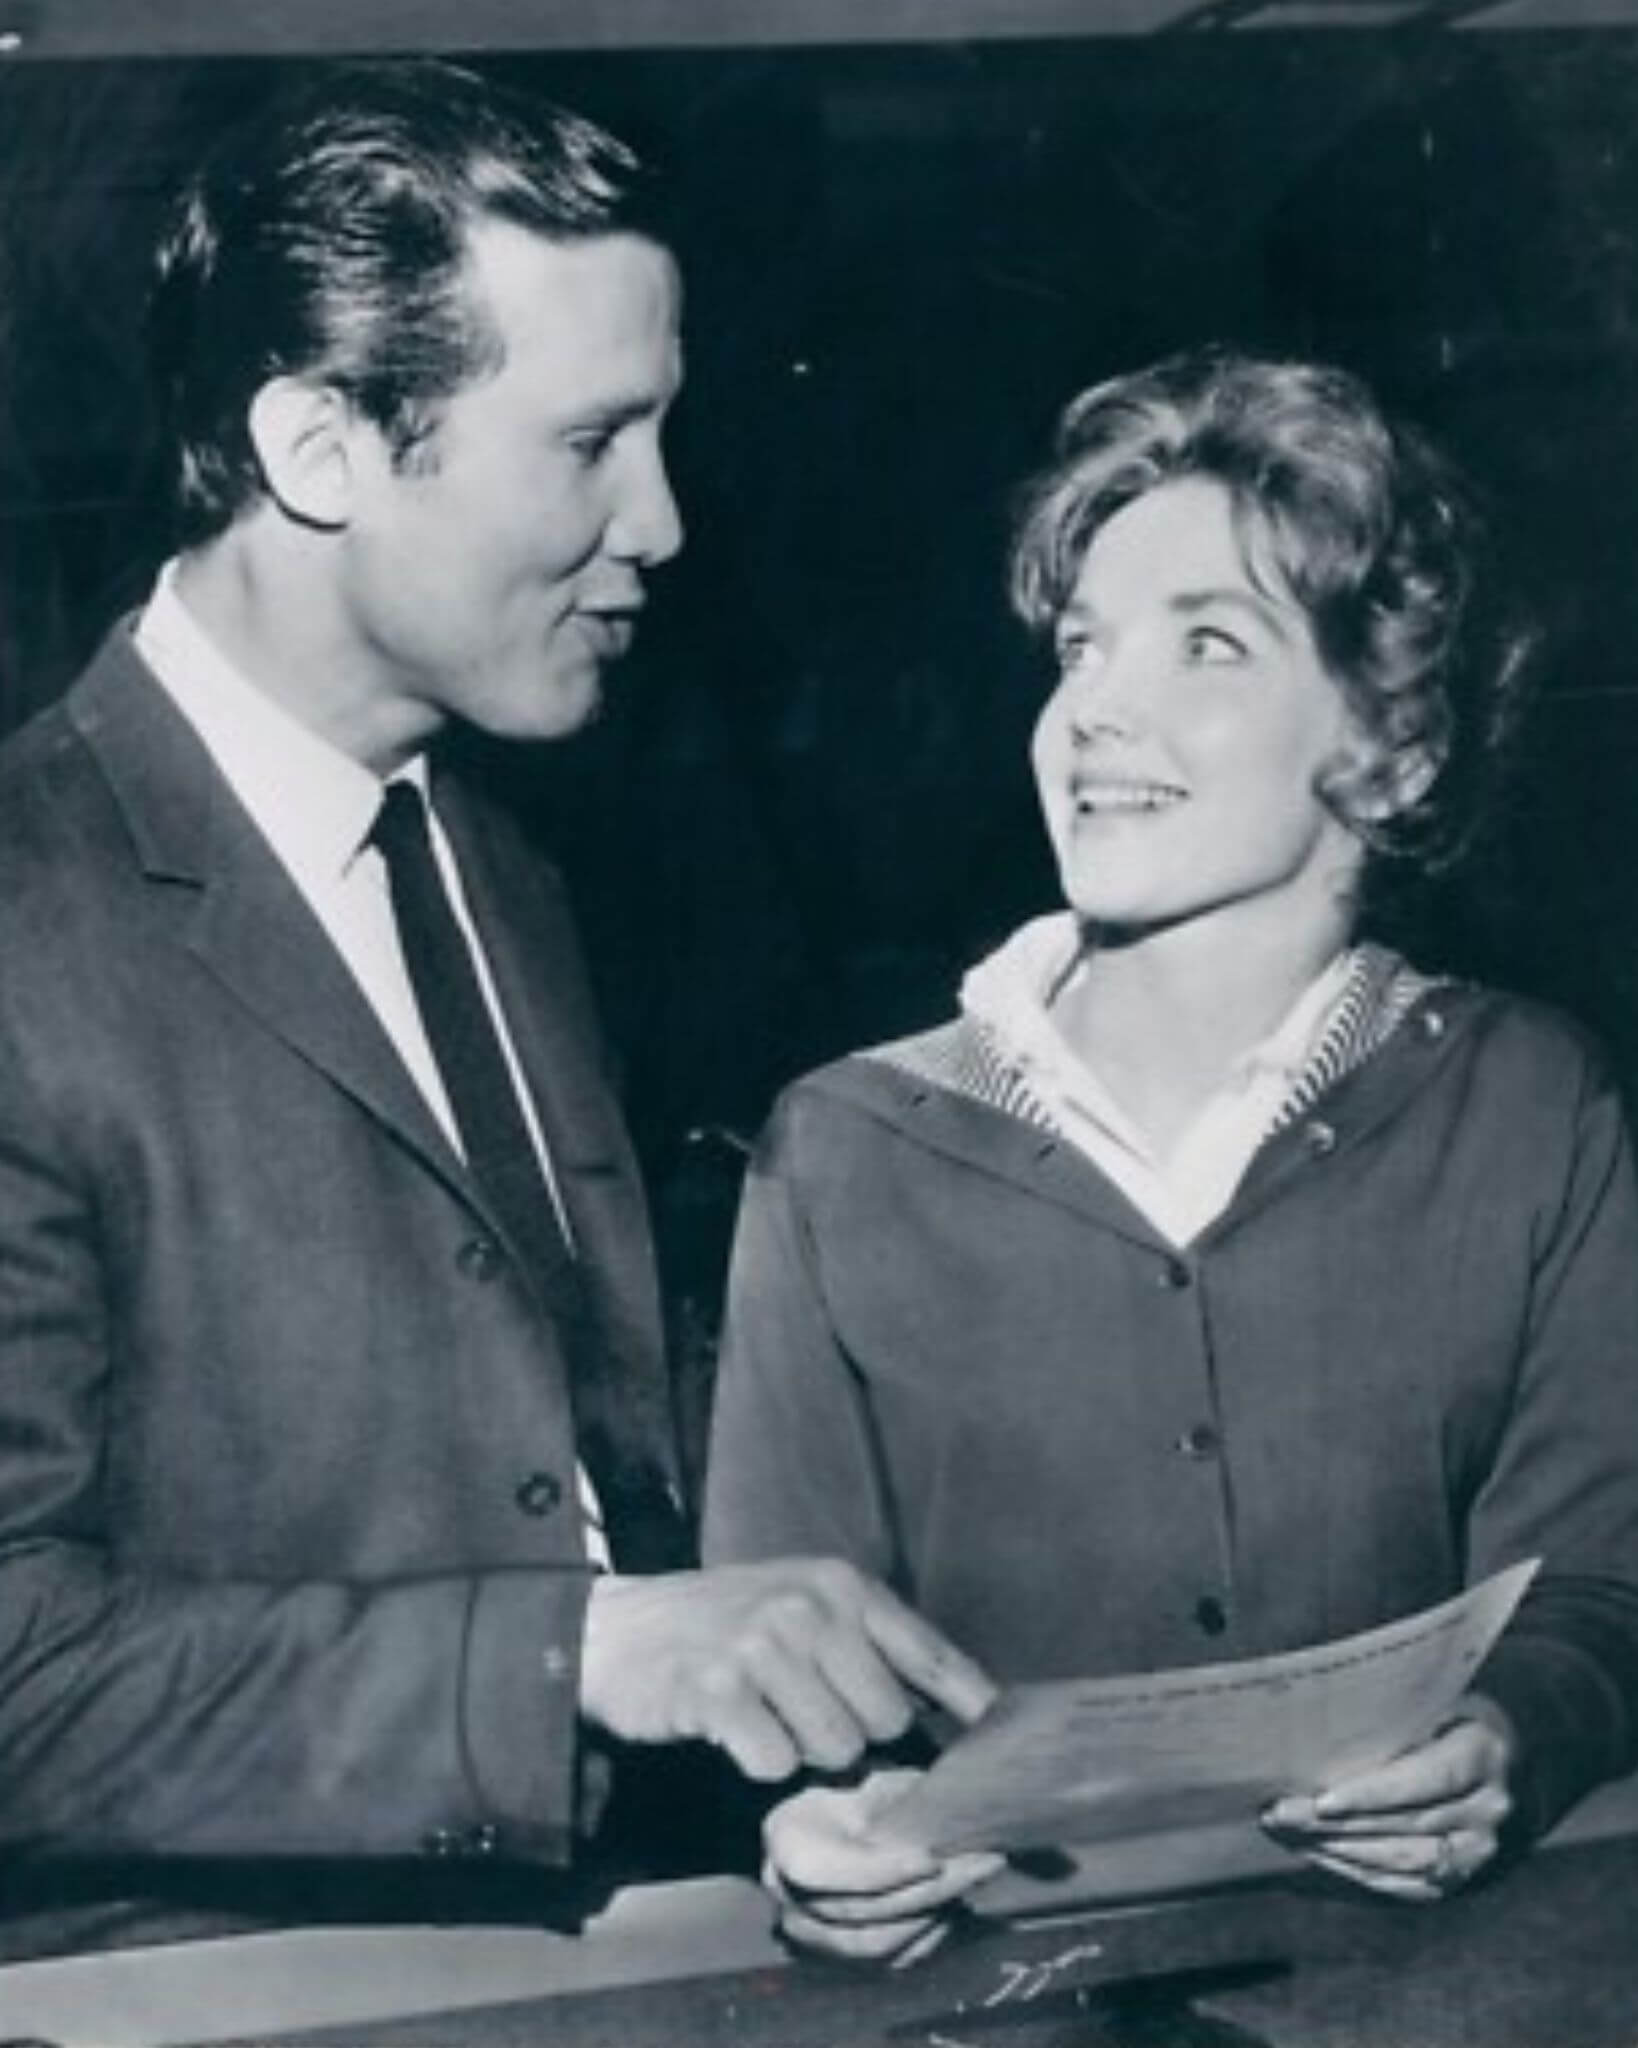 Henry Silva tied the knot with Cindy Conroy
